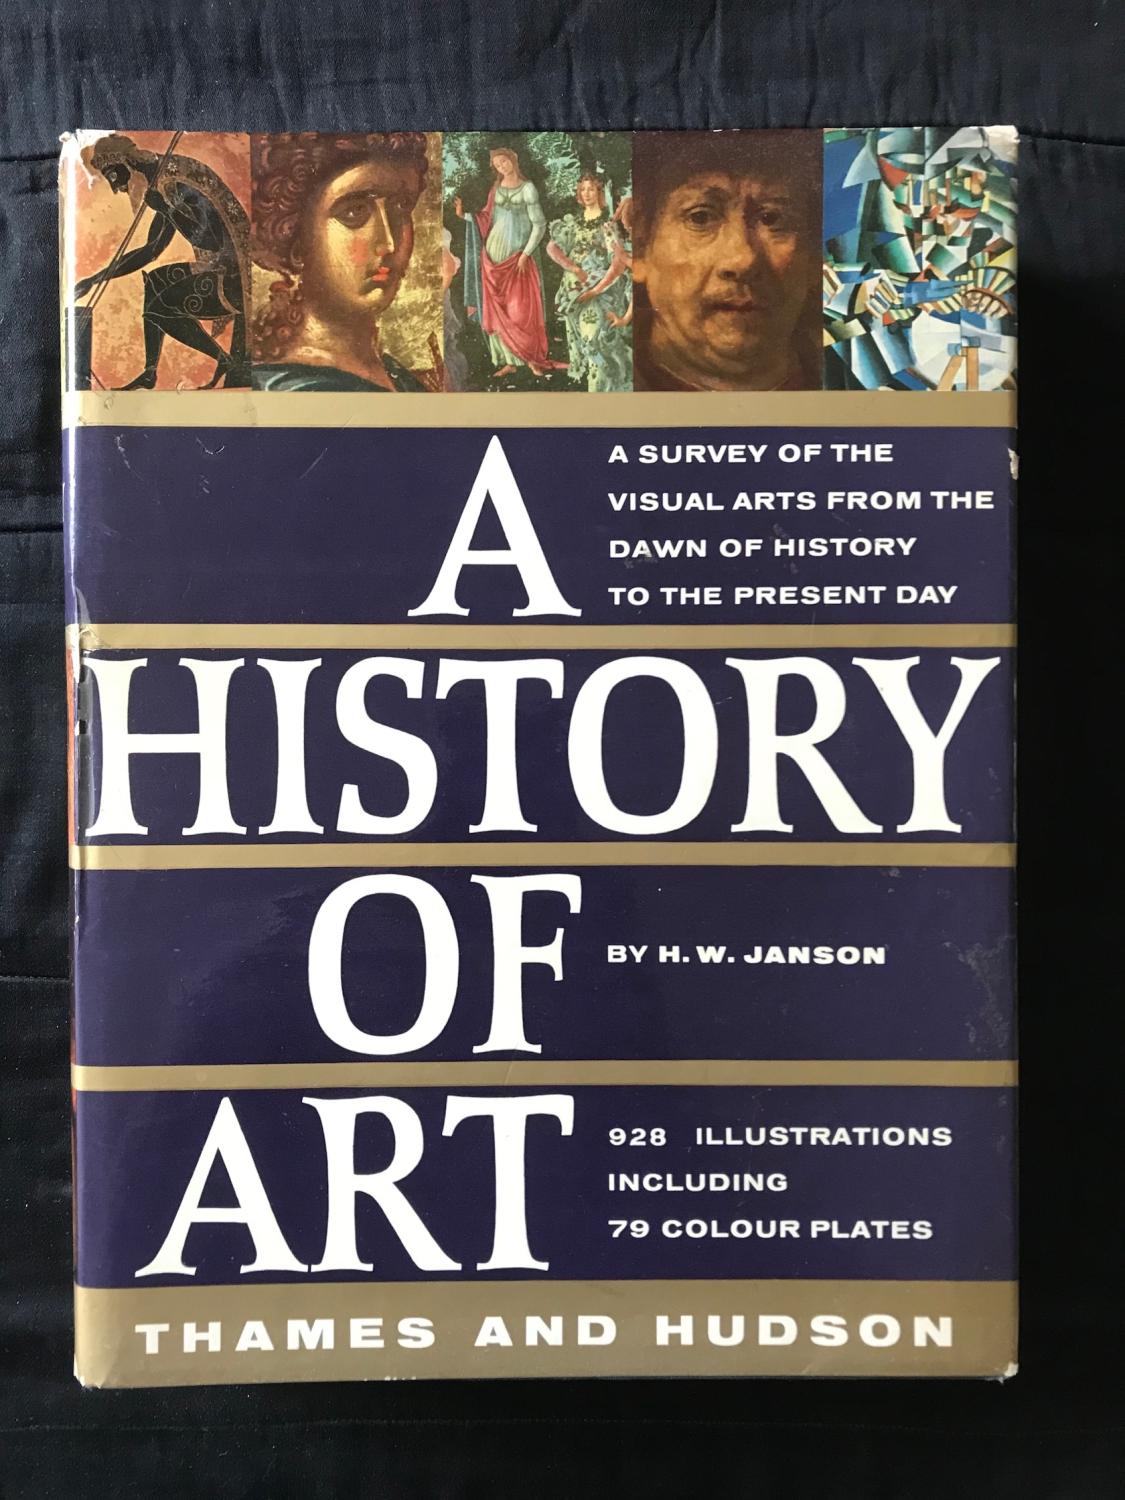 A History of Art: A Survey of the Visual Arts from the Dawn of History to the Present Day [Book]